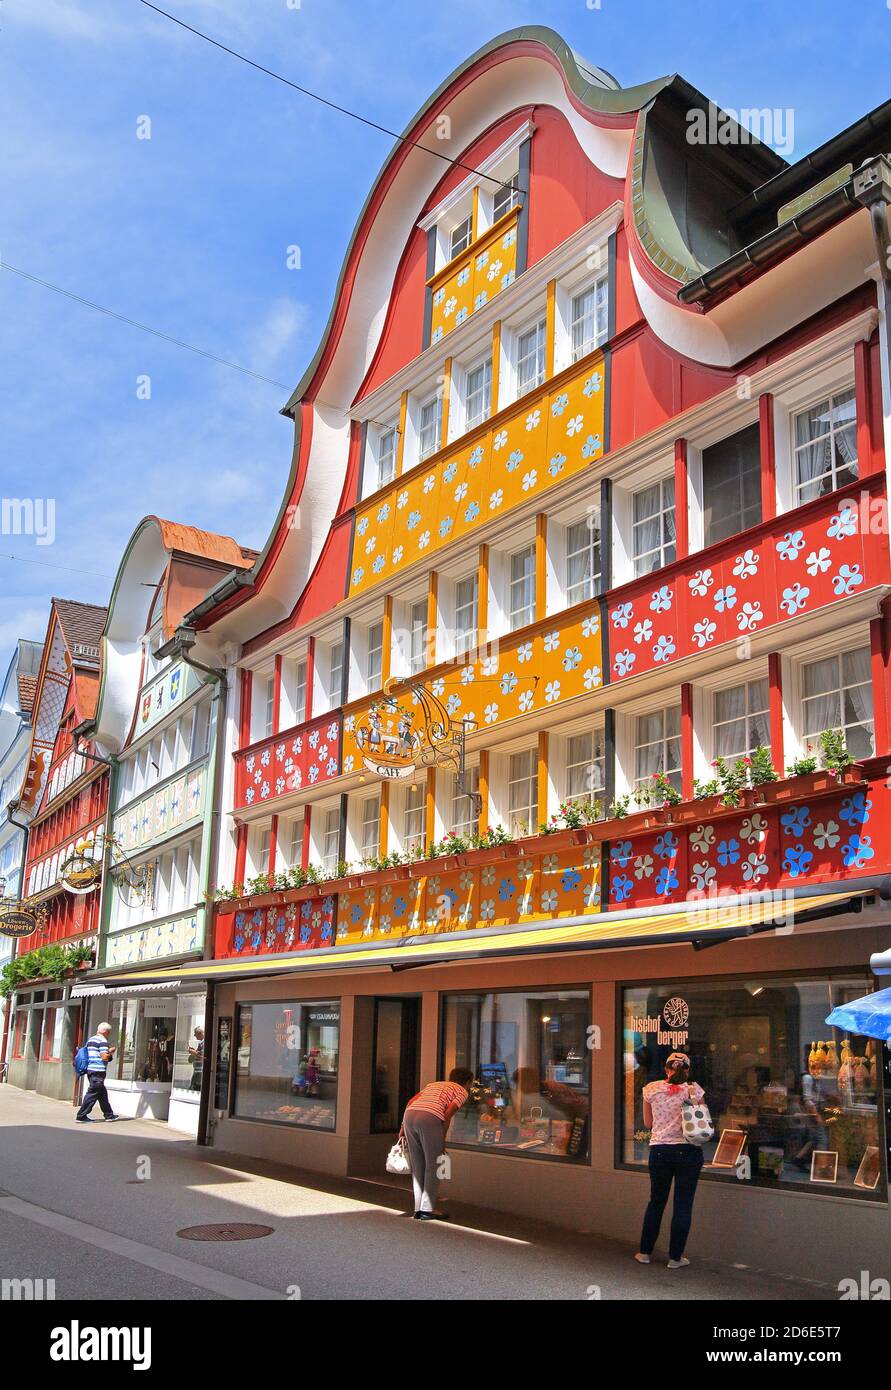 Typical painted houses in Hauptgasse, Appenzell, Appenzeller Land, Canton of Appenzell-Innerrhoden, Switzerland Stock Photo